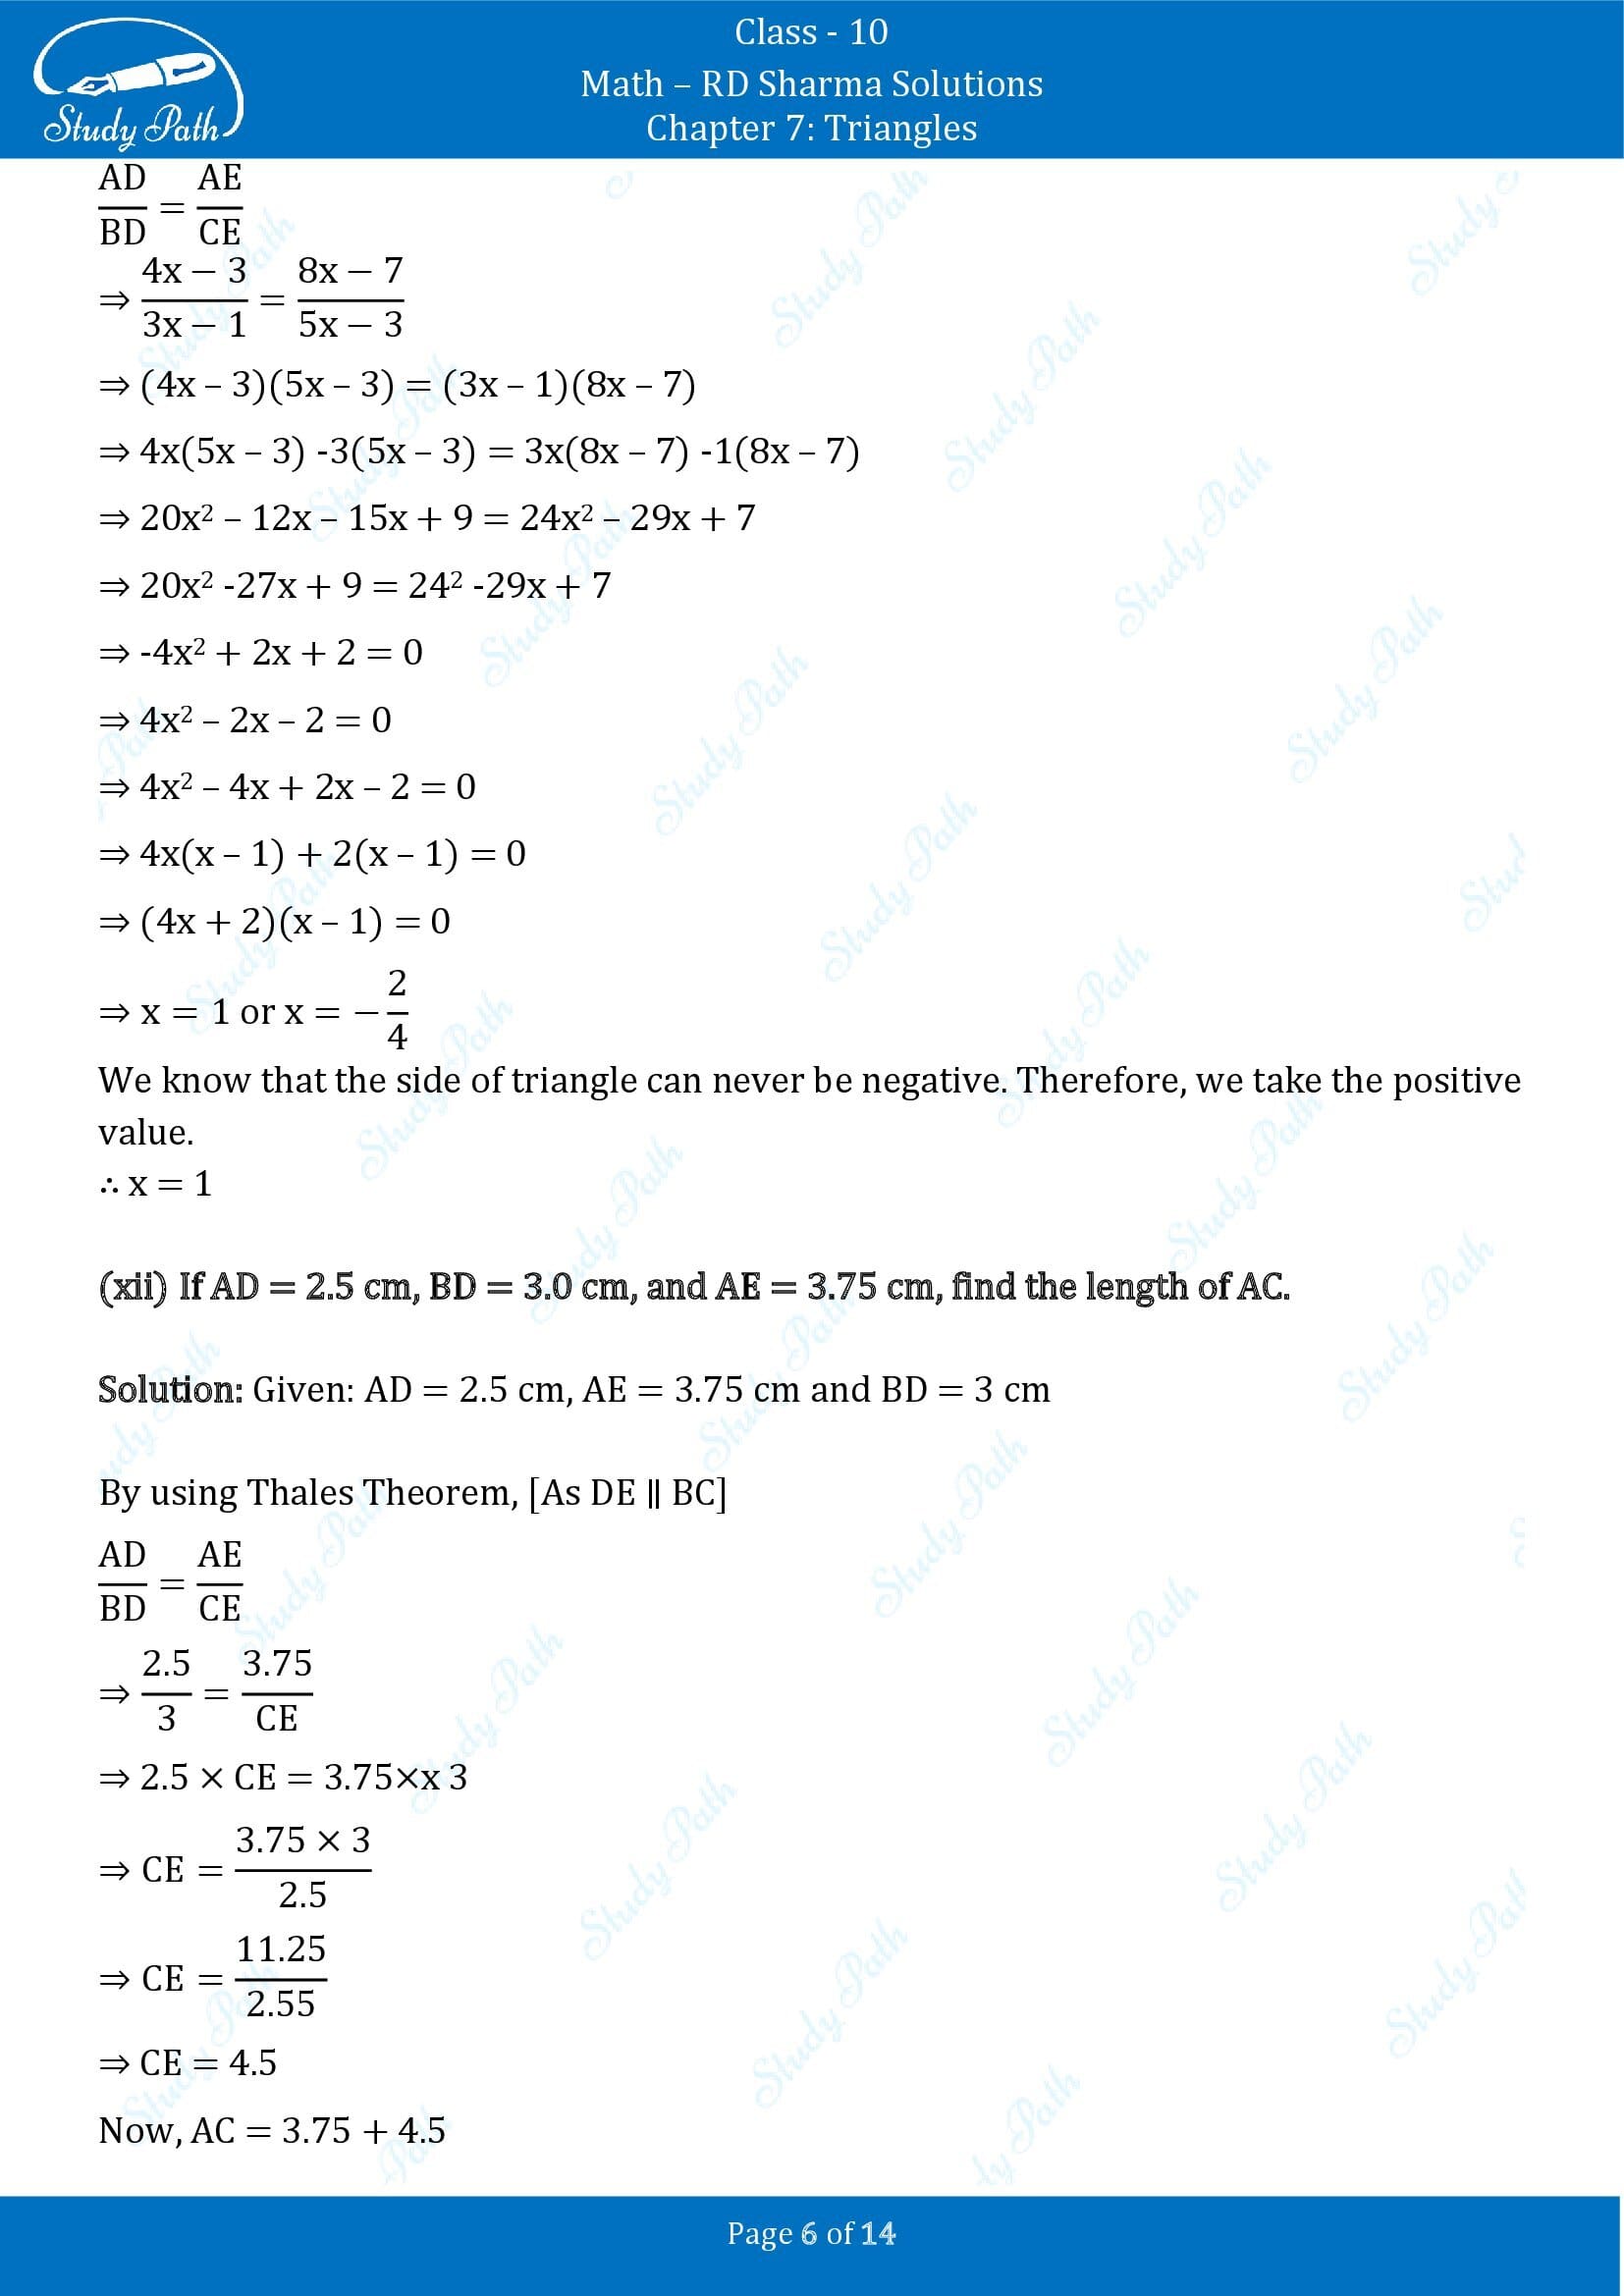 RD Sharma Solutions Class 10 Chapter 7 Triangles Exercise 7.2 00006